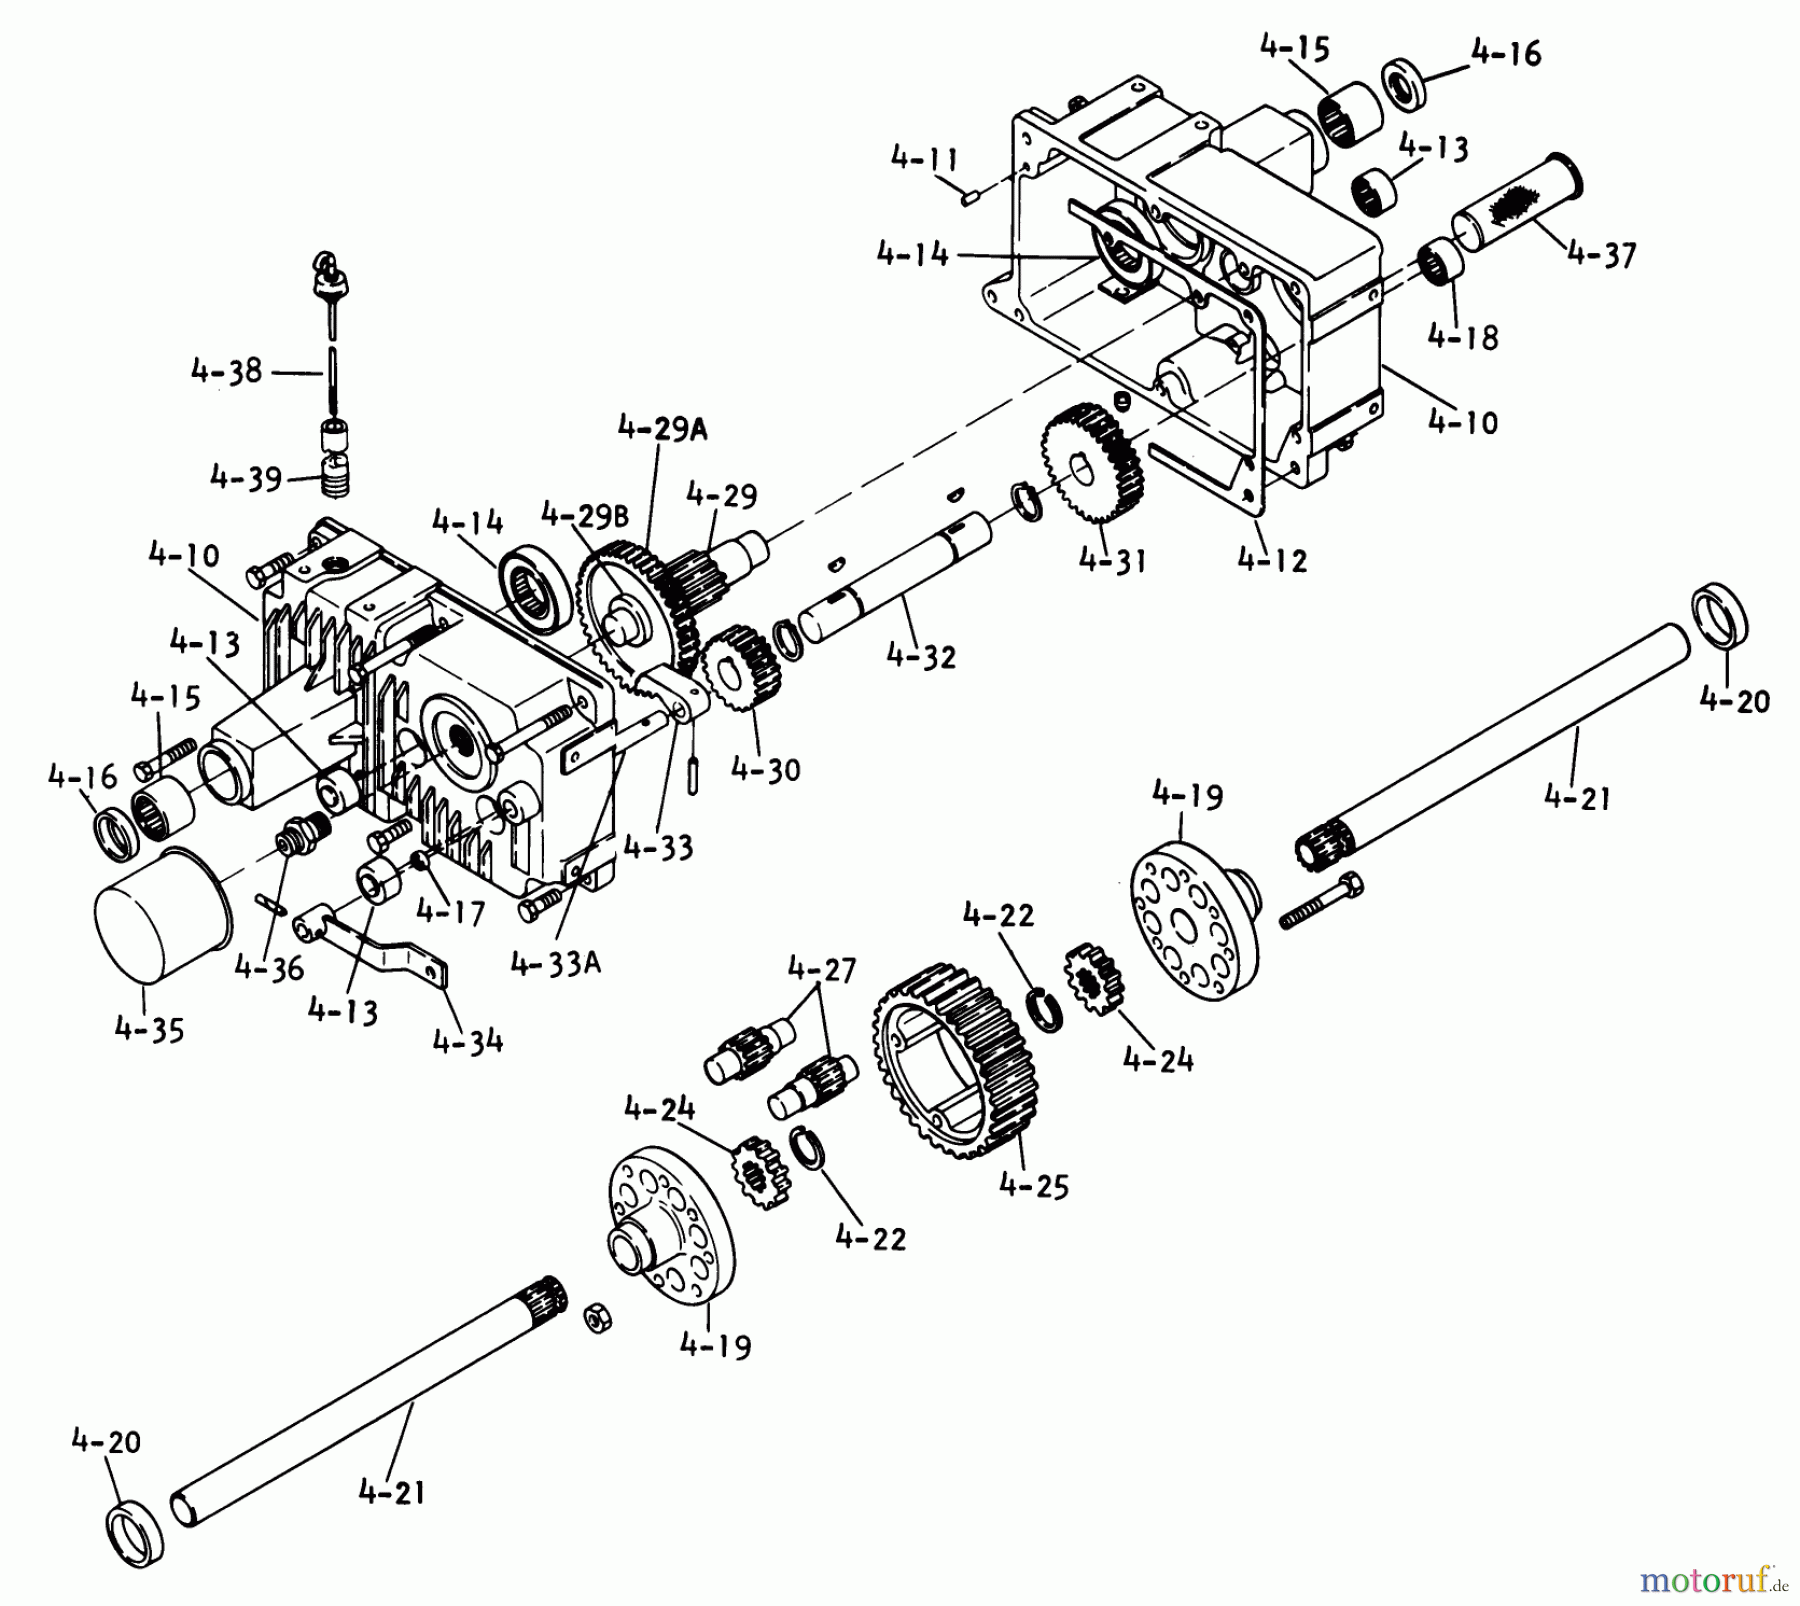  Toro Neu Mowers, Lawn & Garden Tractor Seite 1 1-0651 (D-160) - Toro D-160 Automatic Tractor, 1975 4.010 TRANSAXLE-COMPONENT PARTS (FIG. 4A)